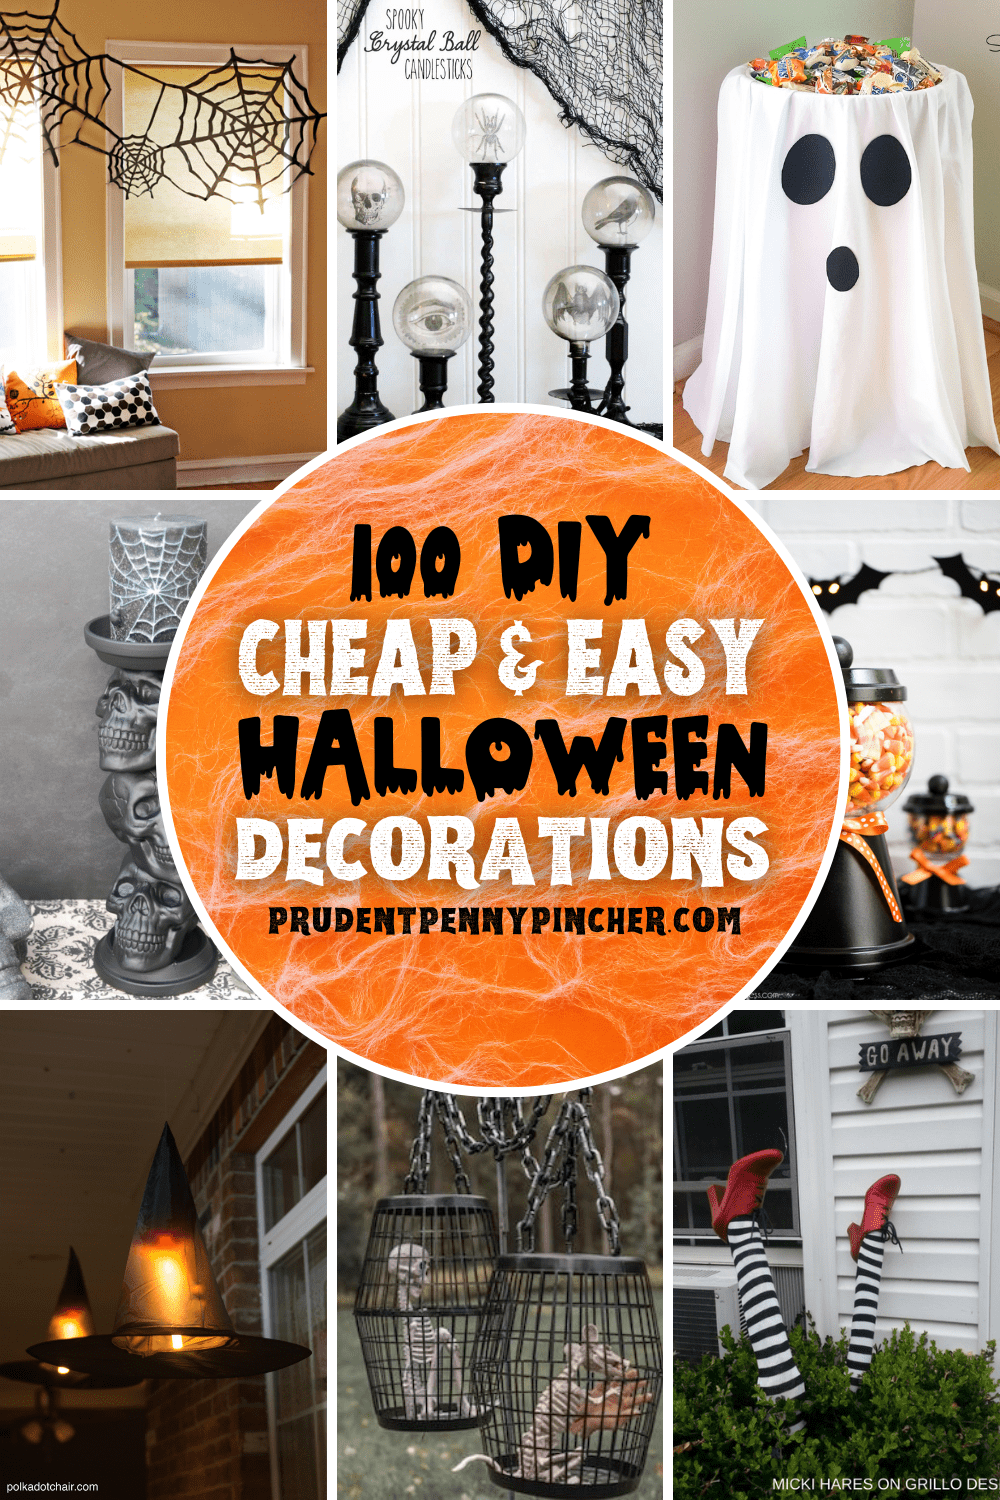 Do-it-yourself Halloween decorations